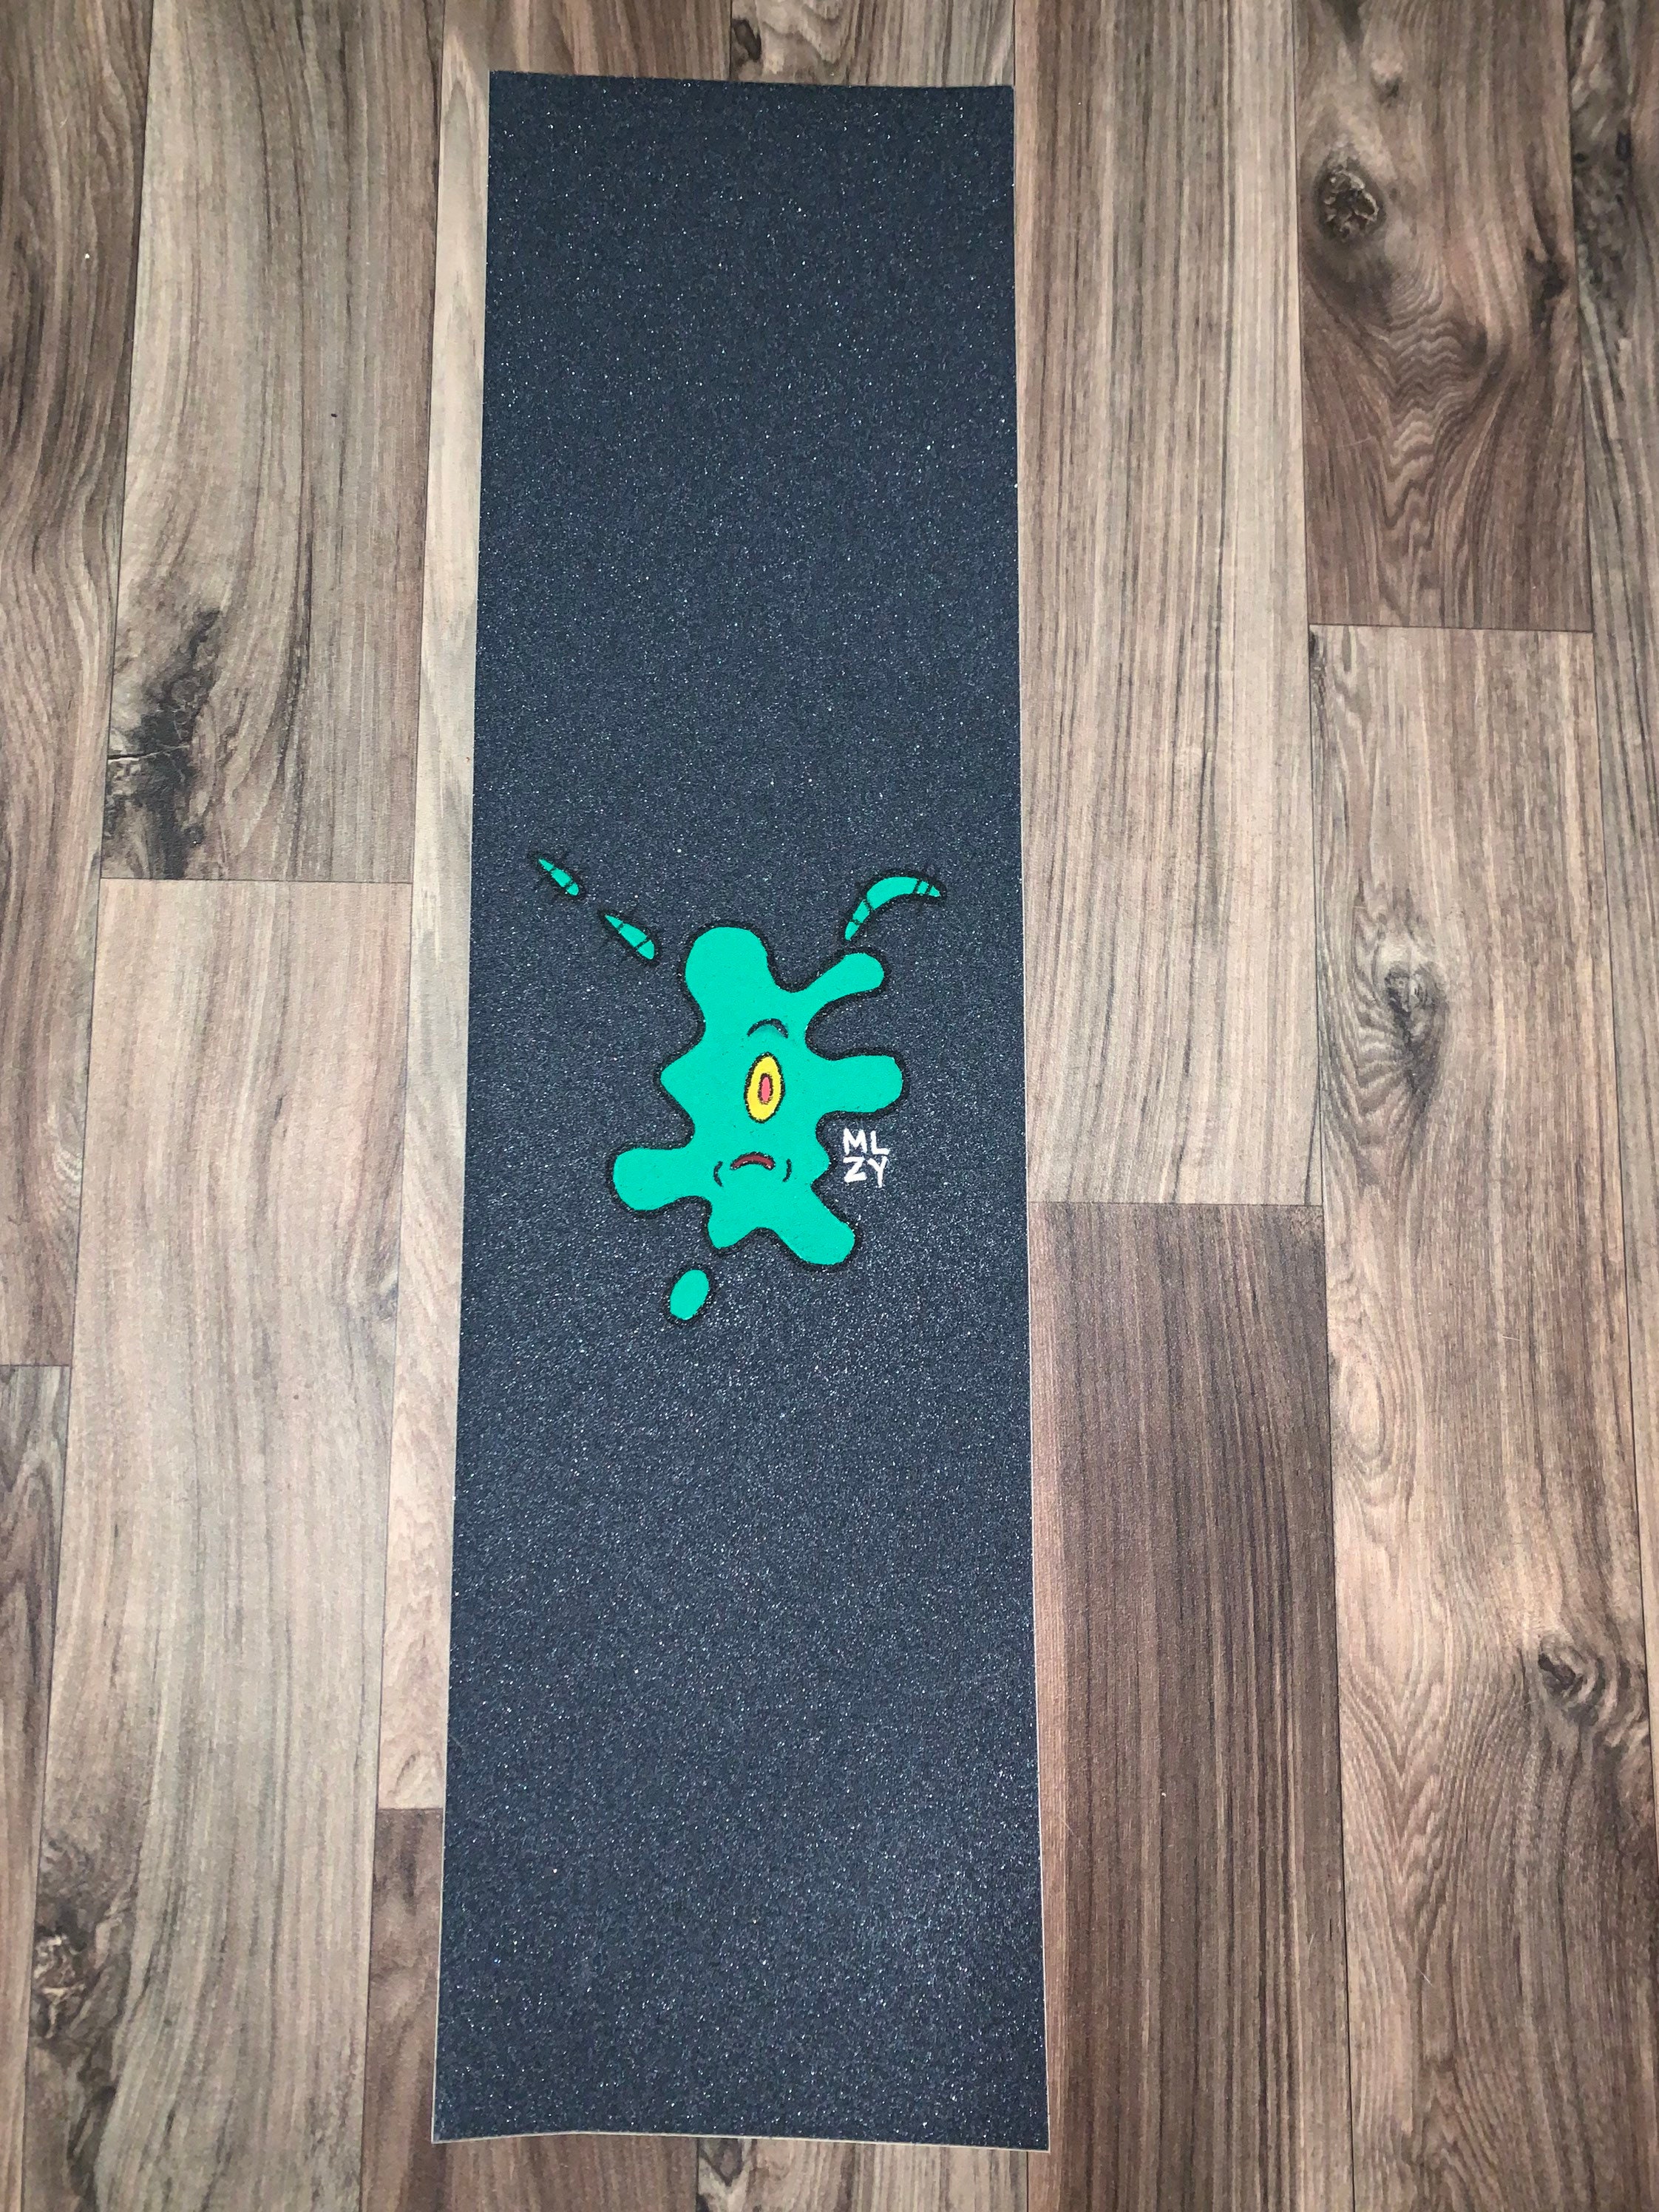 First time Applying and making a custom grip tape using clear grip tape , a  Grip tape of Pluto and a random Polaroid with the color green to cover a  lil bit